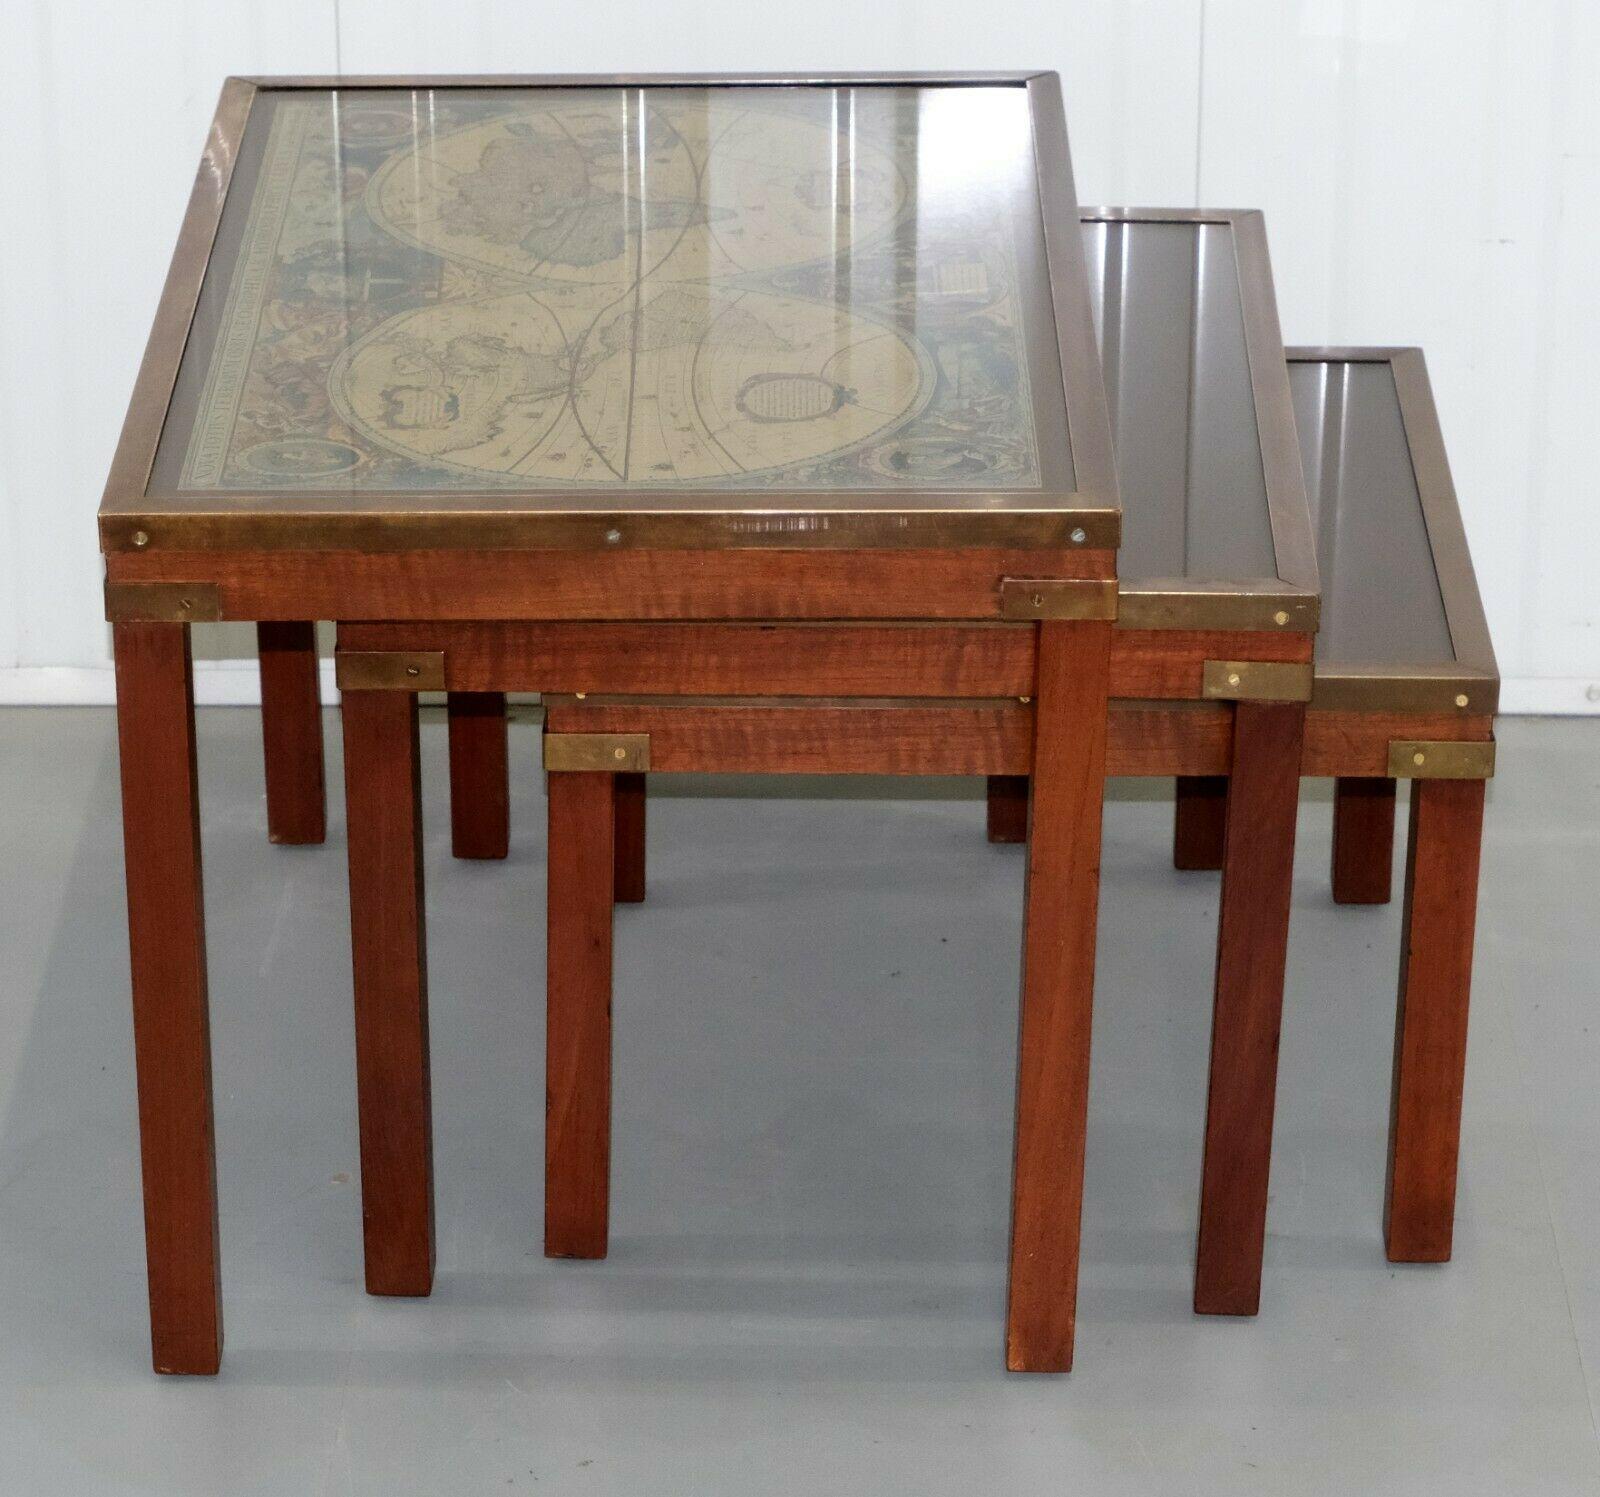 Hand-Crafted Stunning Hardwood Set Coffee / Nest of Tables Military Campaign with World Map